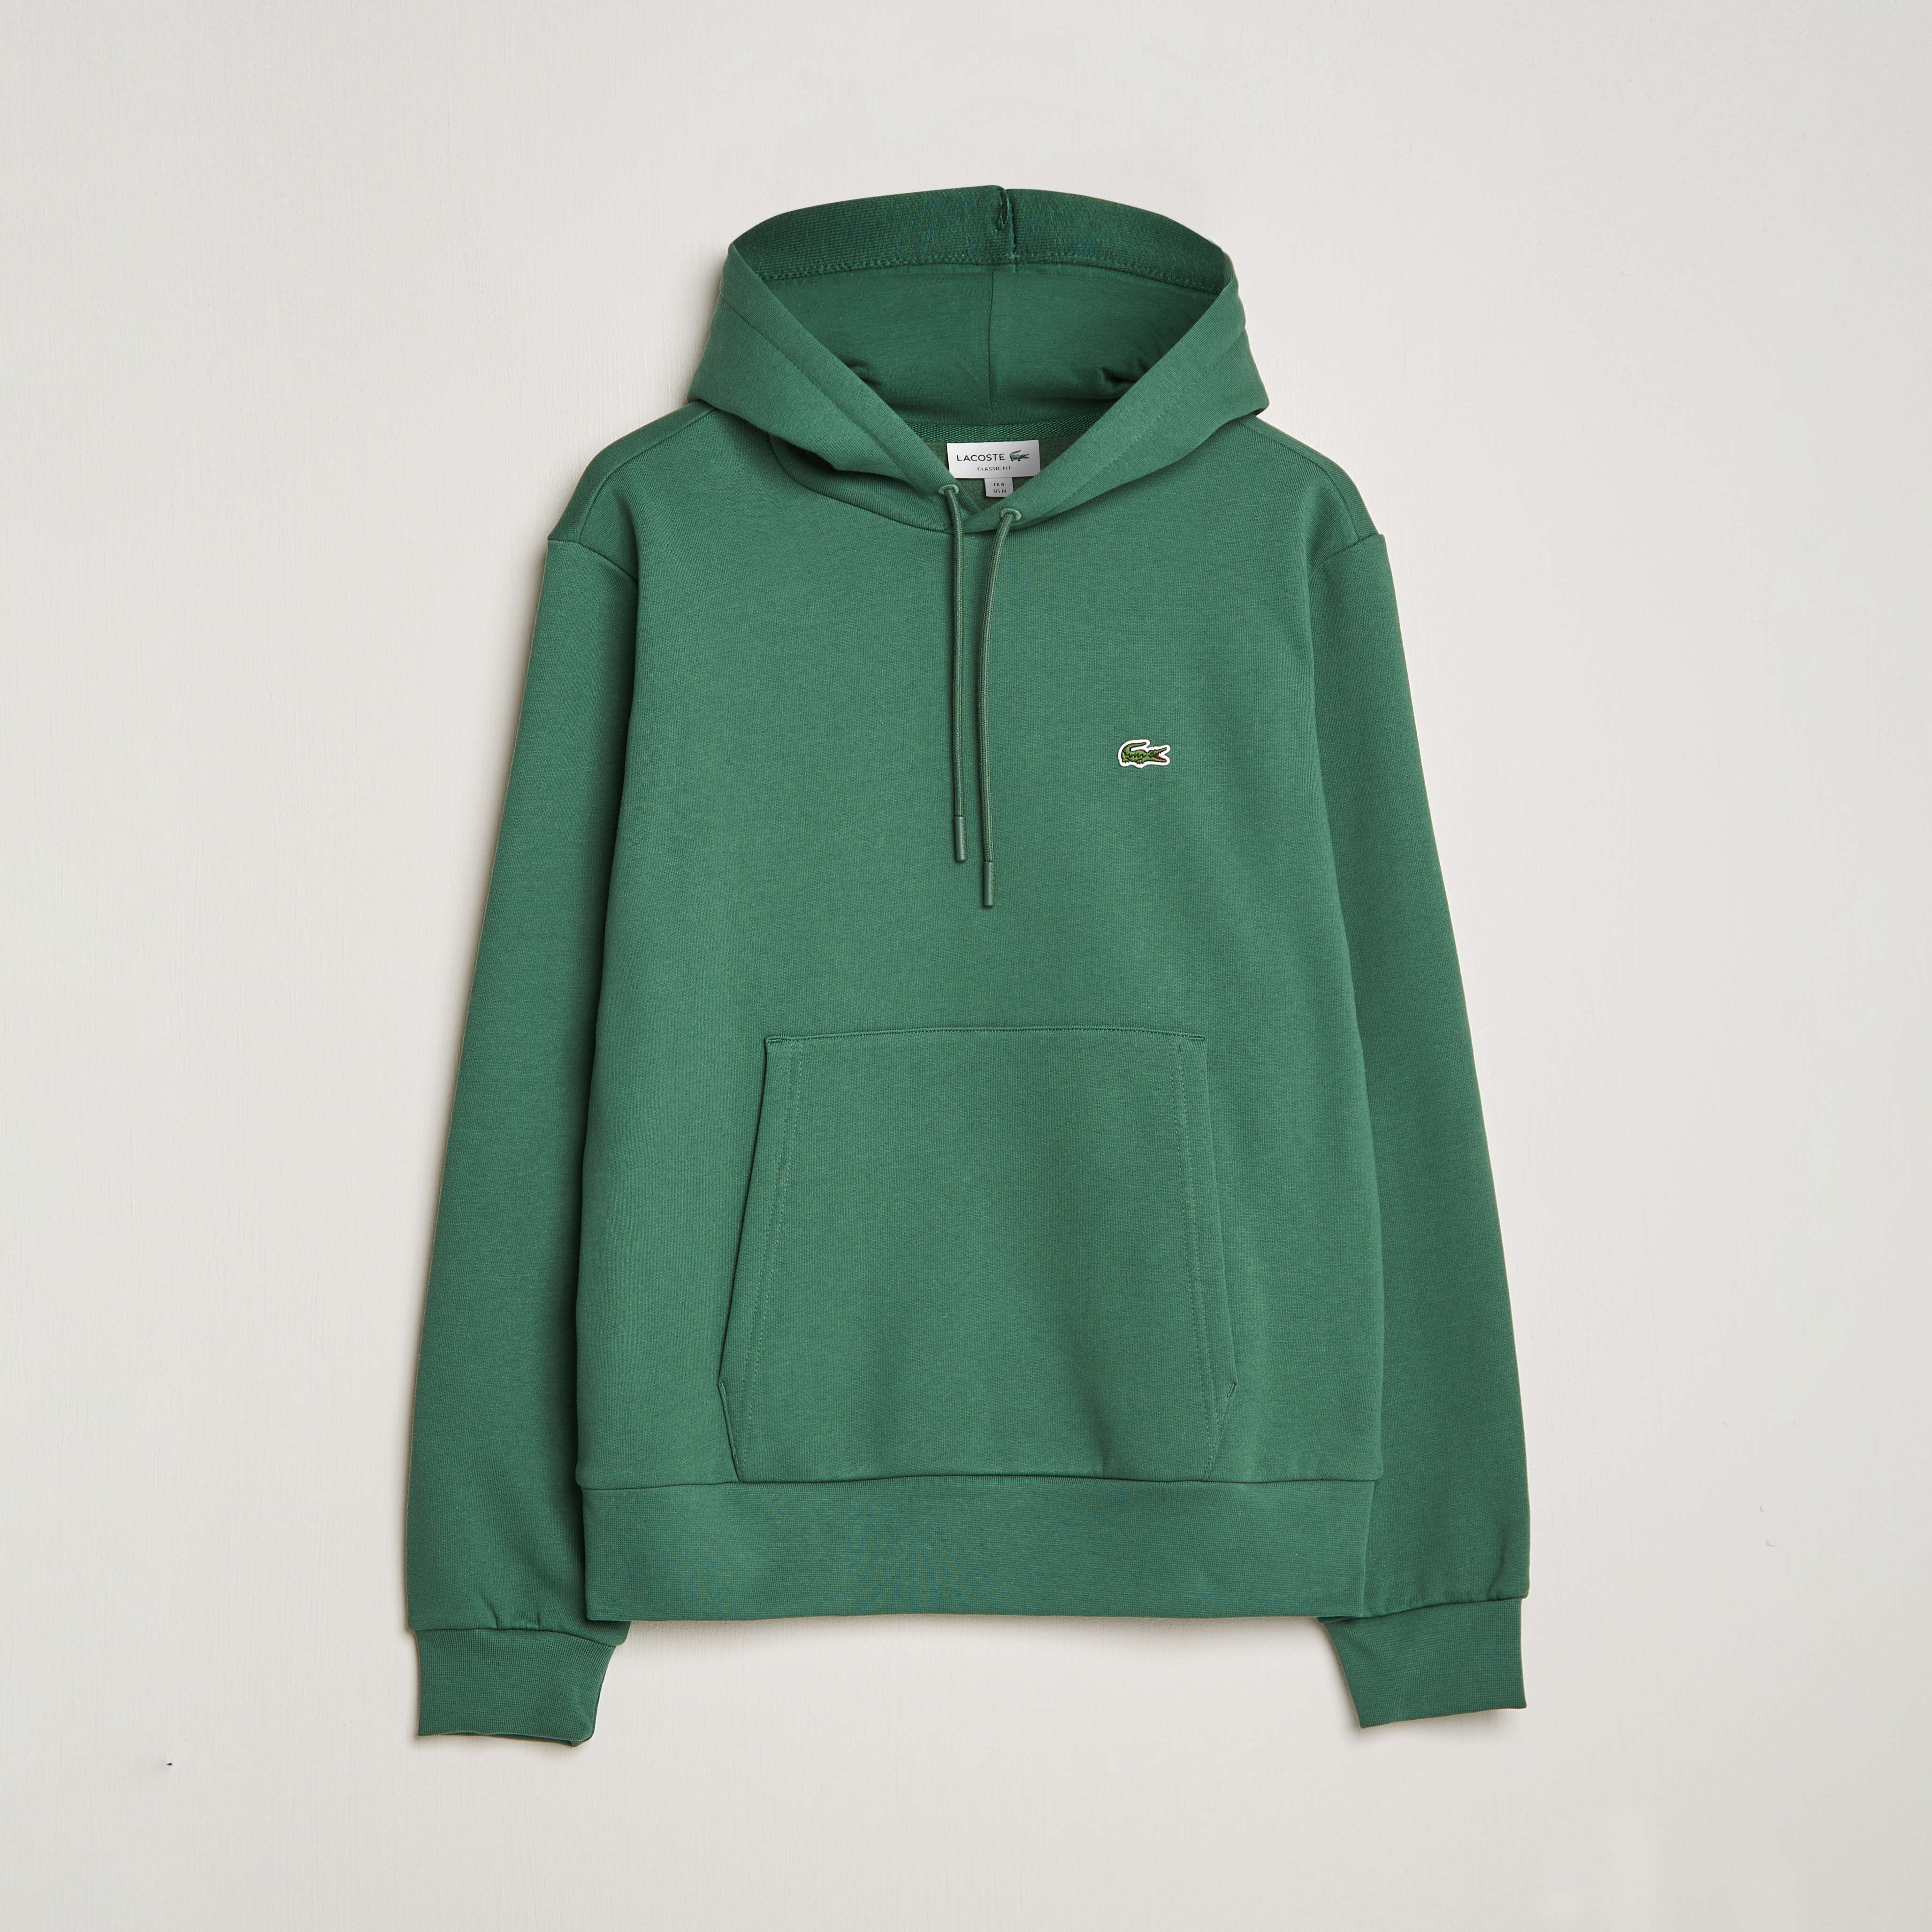 Hoodie Lacoste Sequoia at